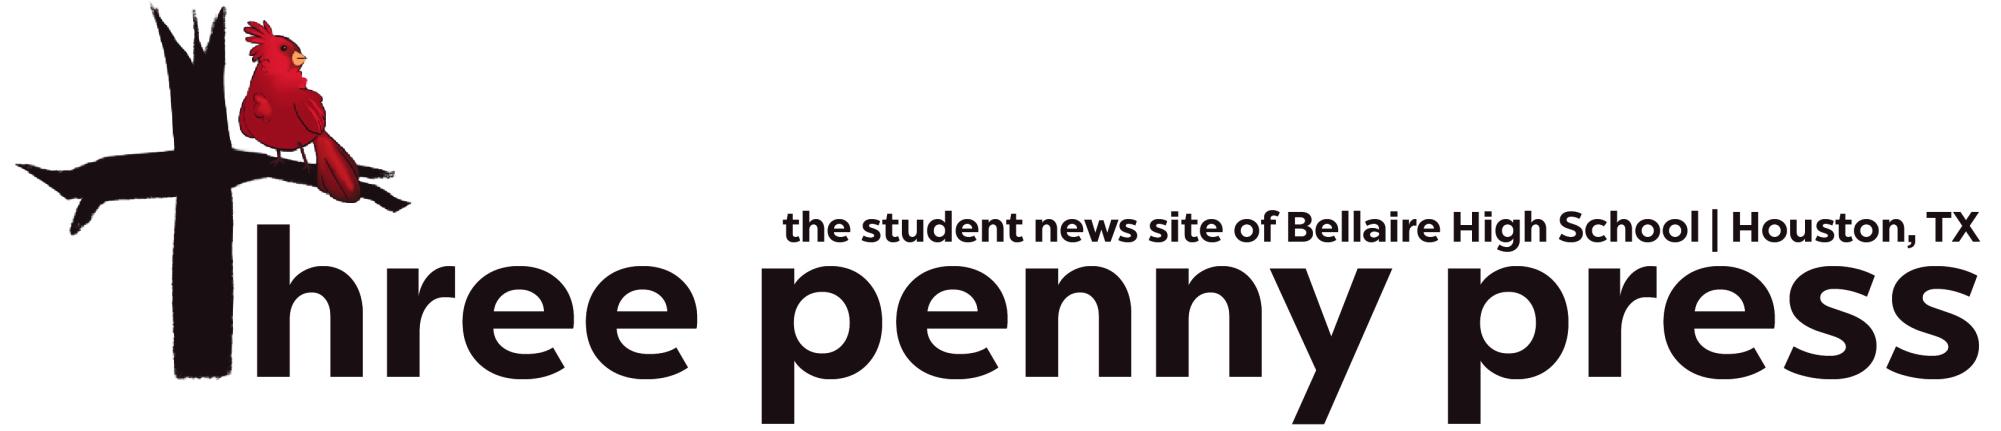 The student news site of Bellaire High School